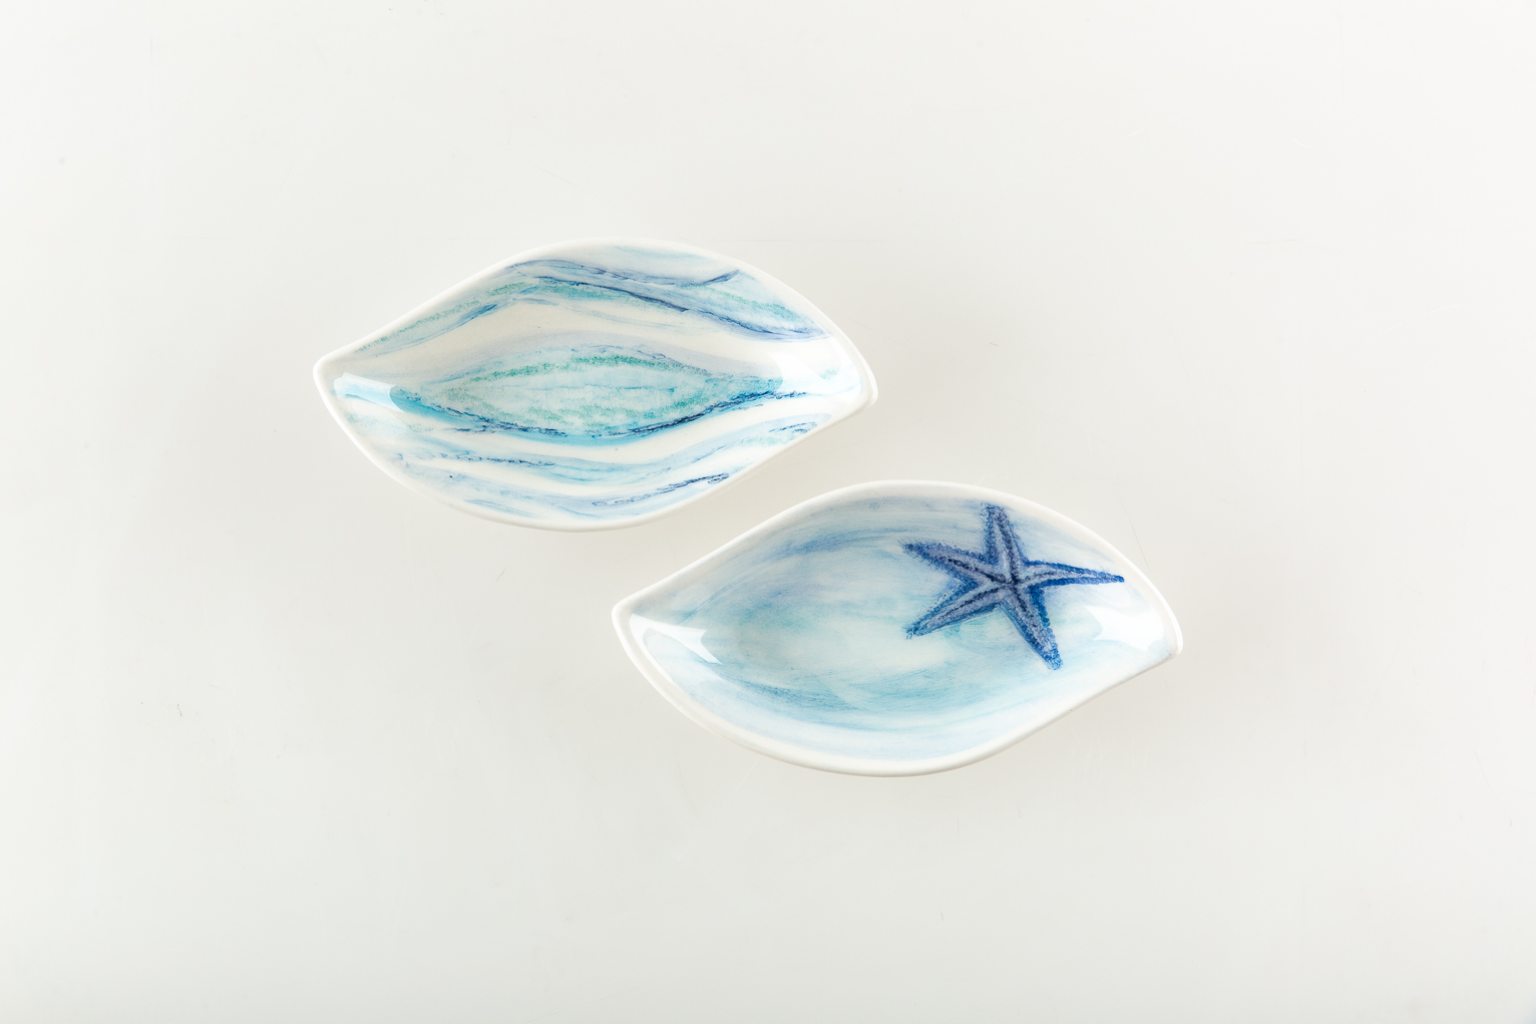 Candy and nut bowls with turquoise waves and starfish